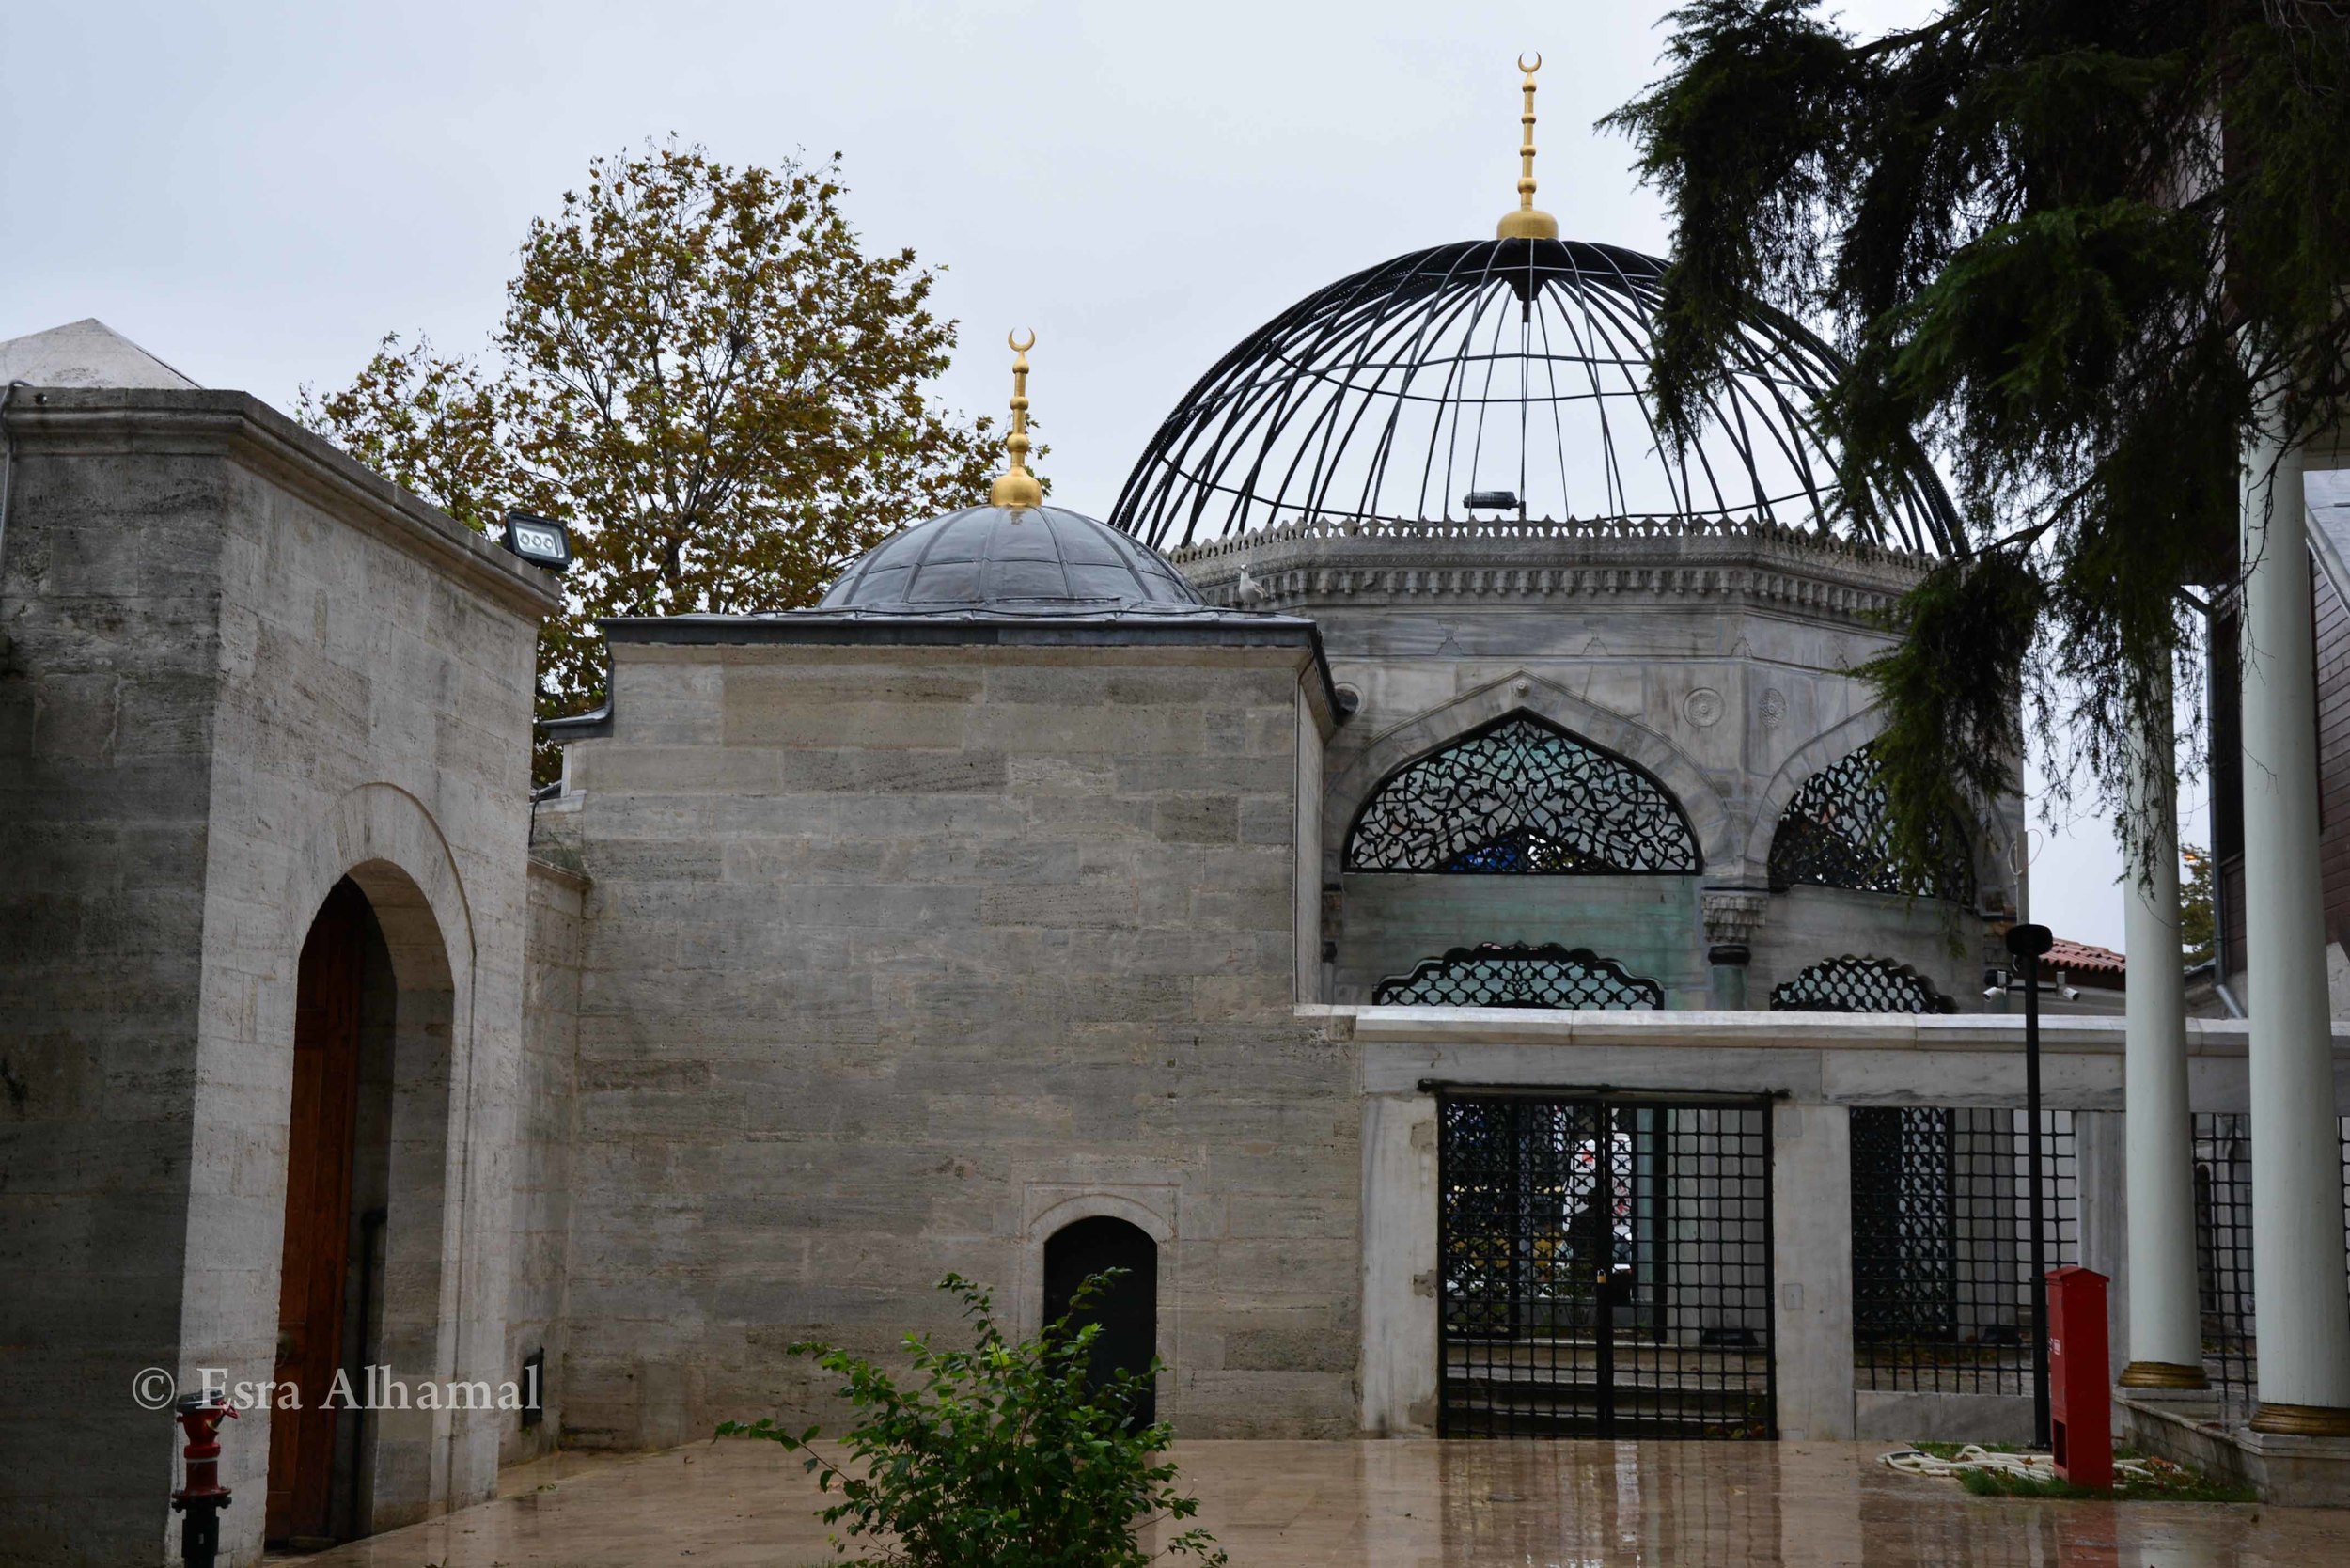 Yeni Valide Mosque on the outside